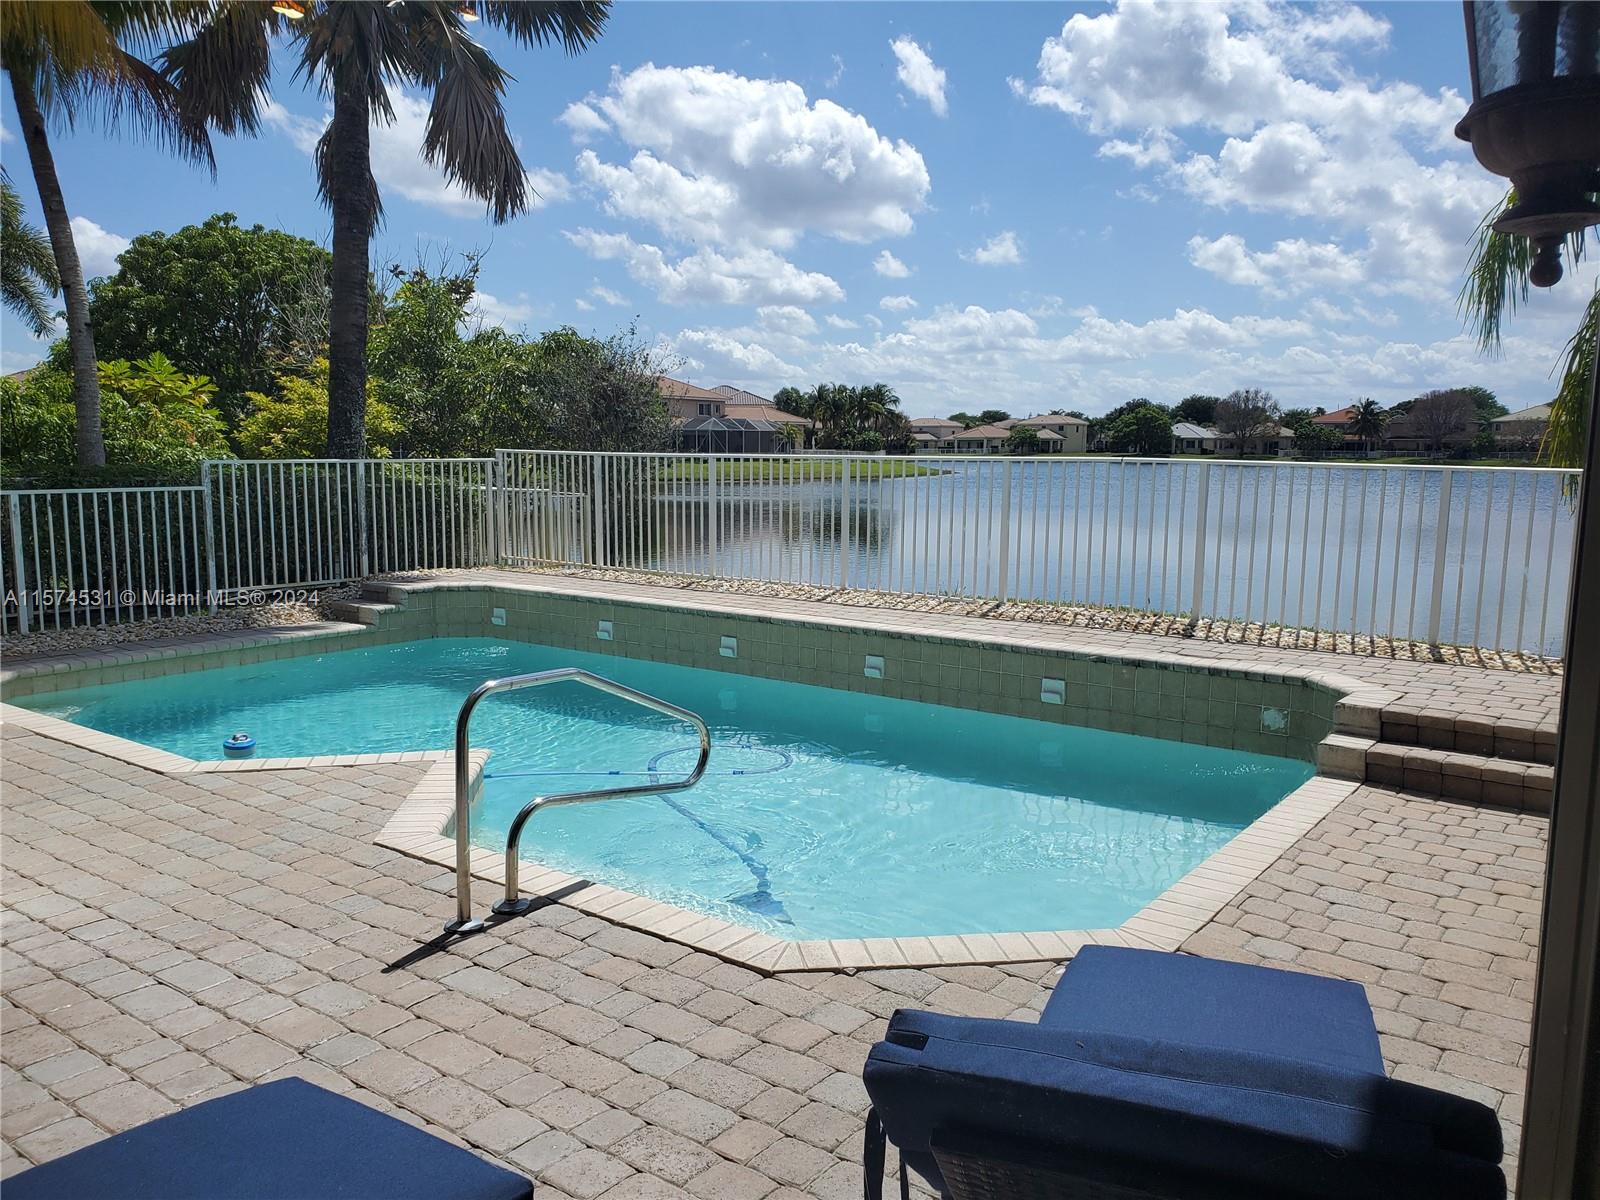 6145 Sw 192nd Ave, Pembroke Pines, Miami-Dade County, Florida - 5 Bedrooms  
4 Bathrooms - 